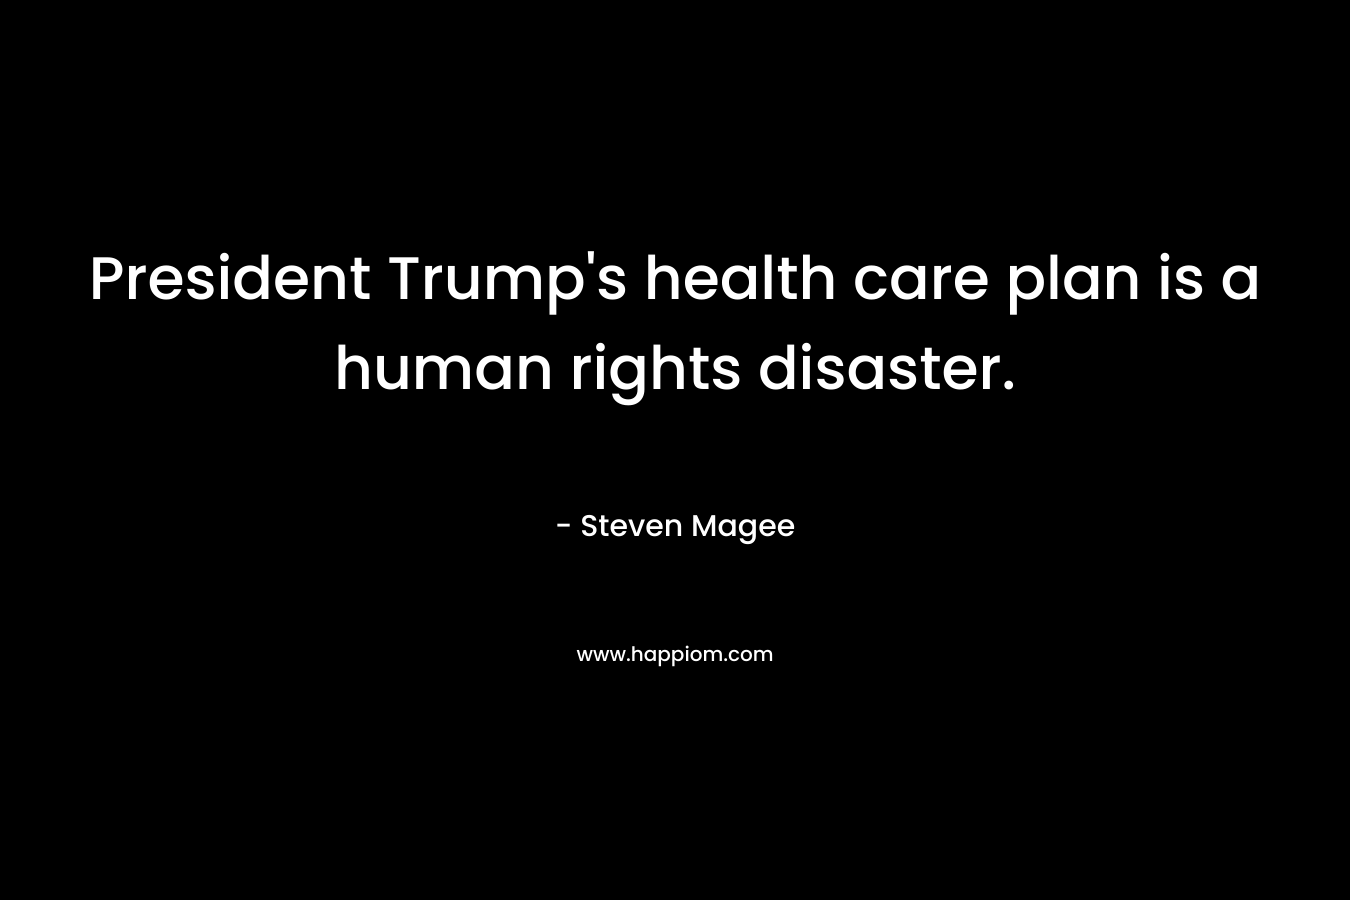 President Trump's health care plan is a human rights disaster.